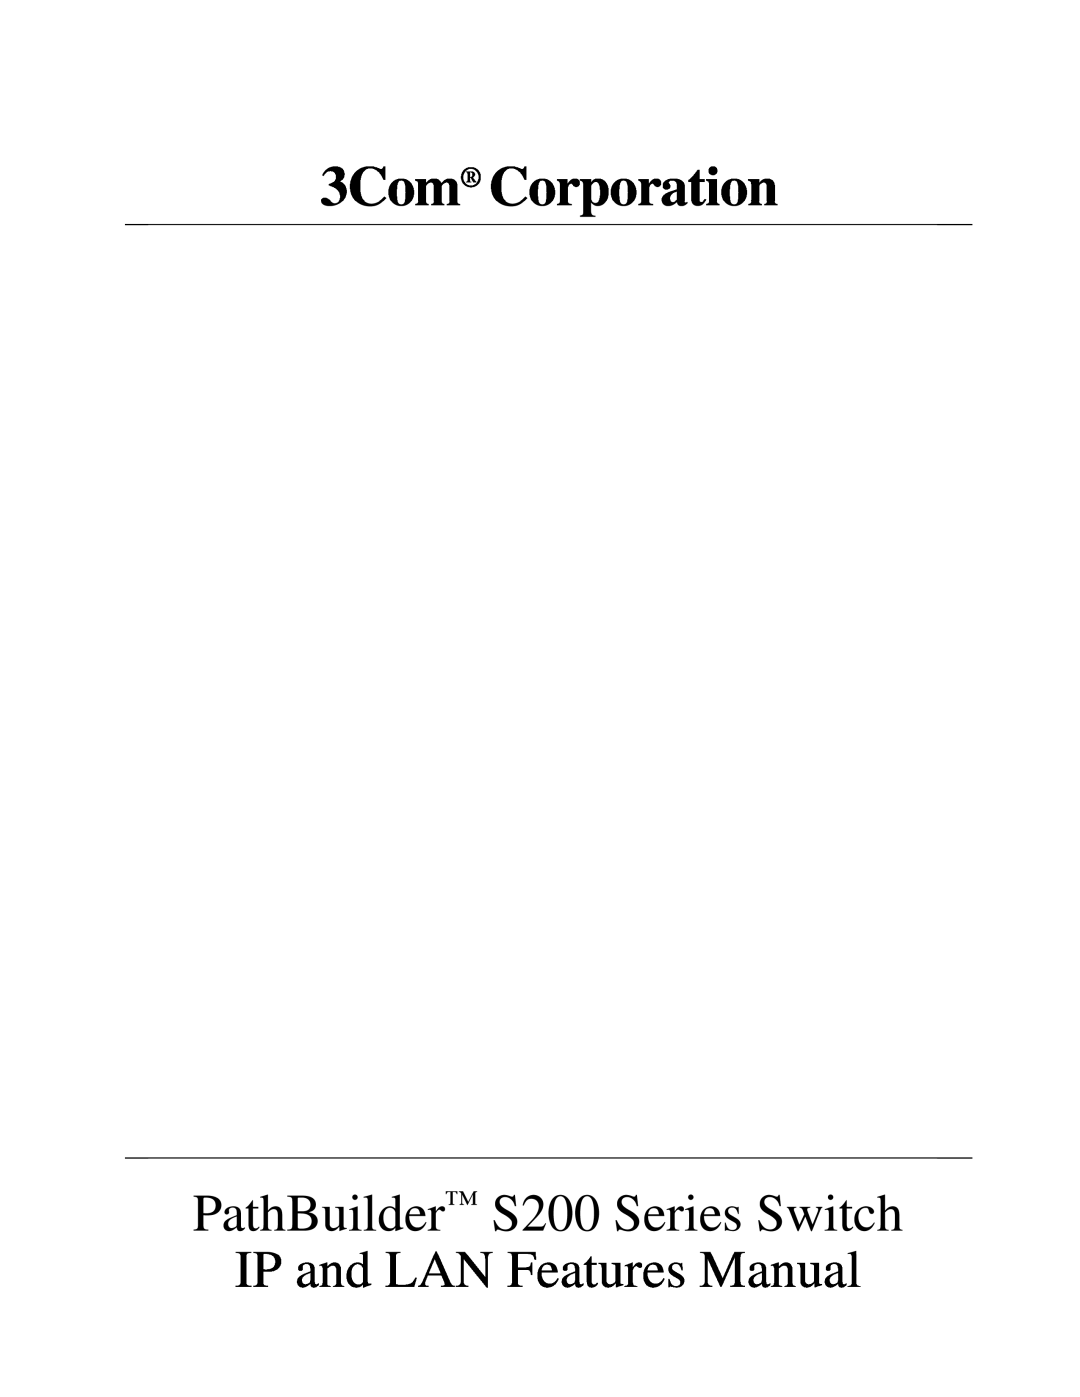 3Com manual 3Com Corporation, PathBuilder S200 Series Switch IP and LAN Features Manual 